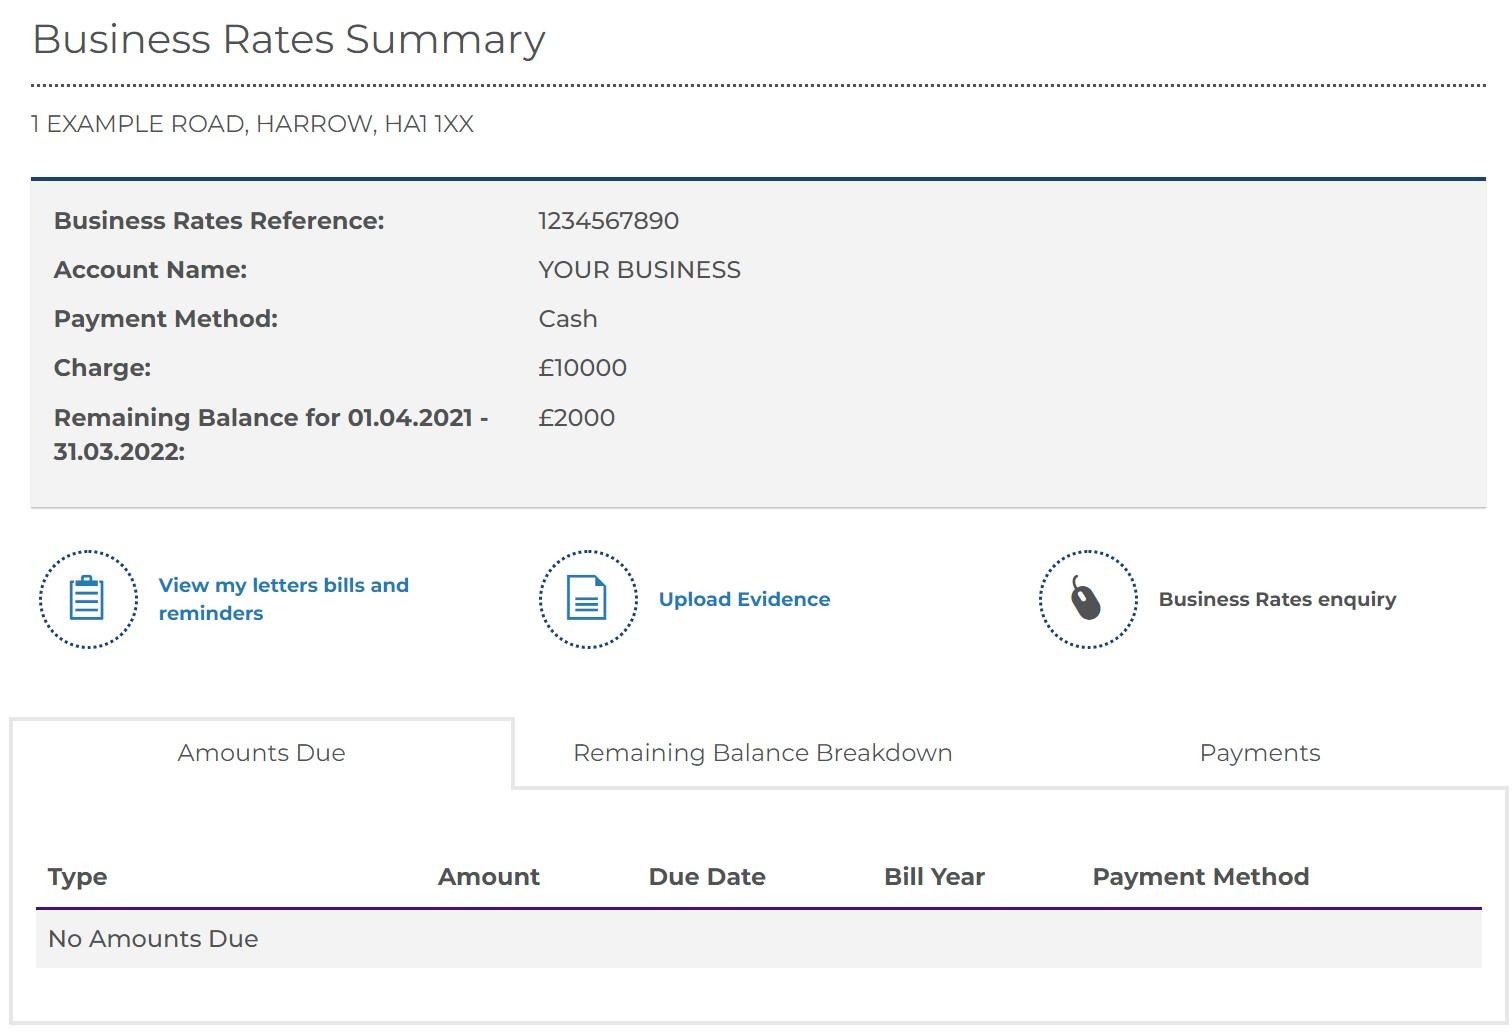 Screenshot of the Business Rates Summary Screen